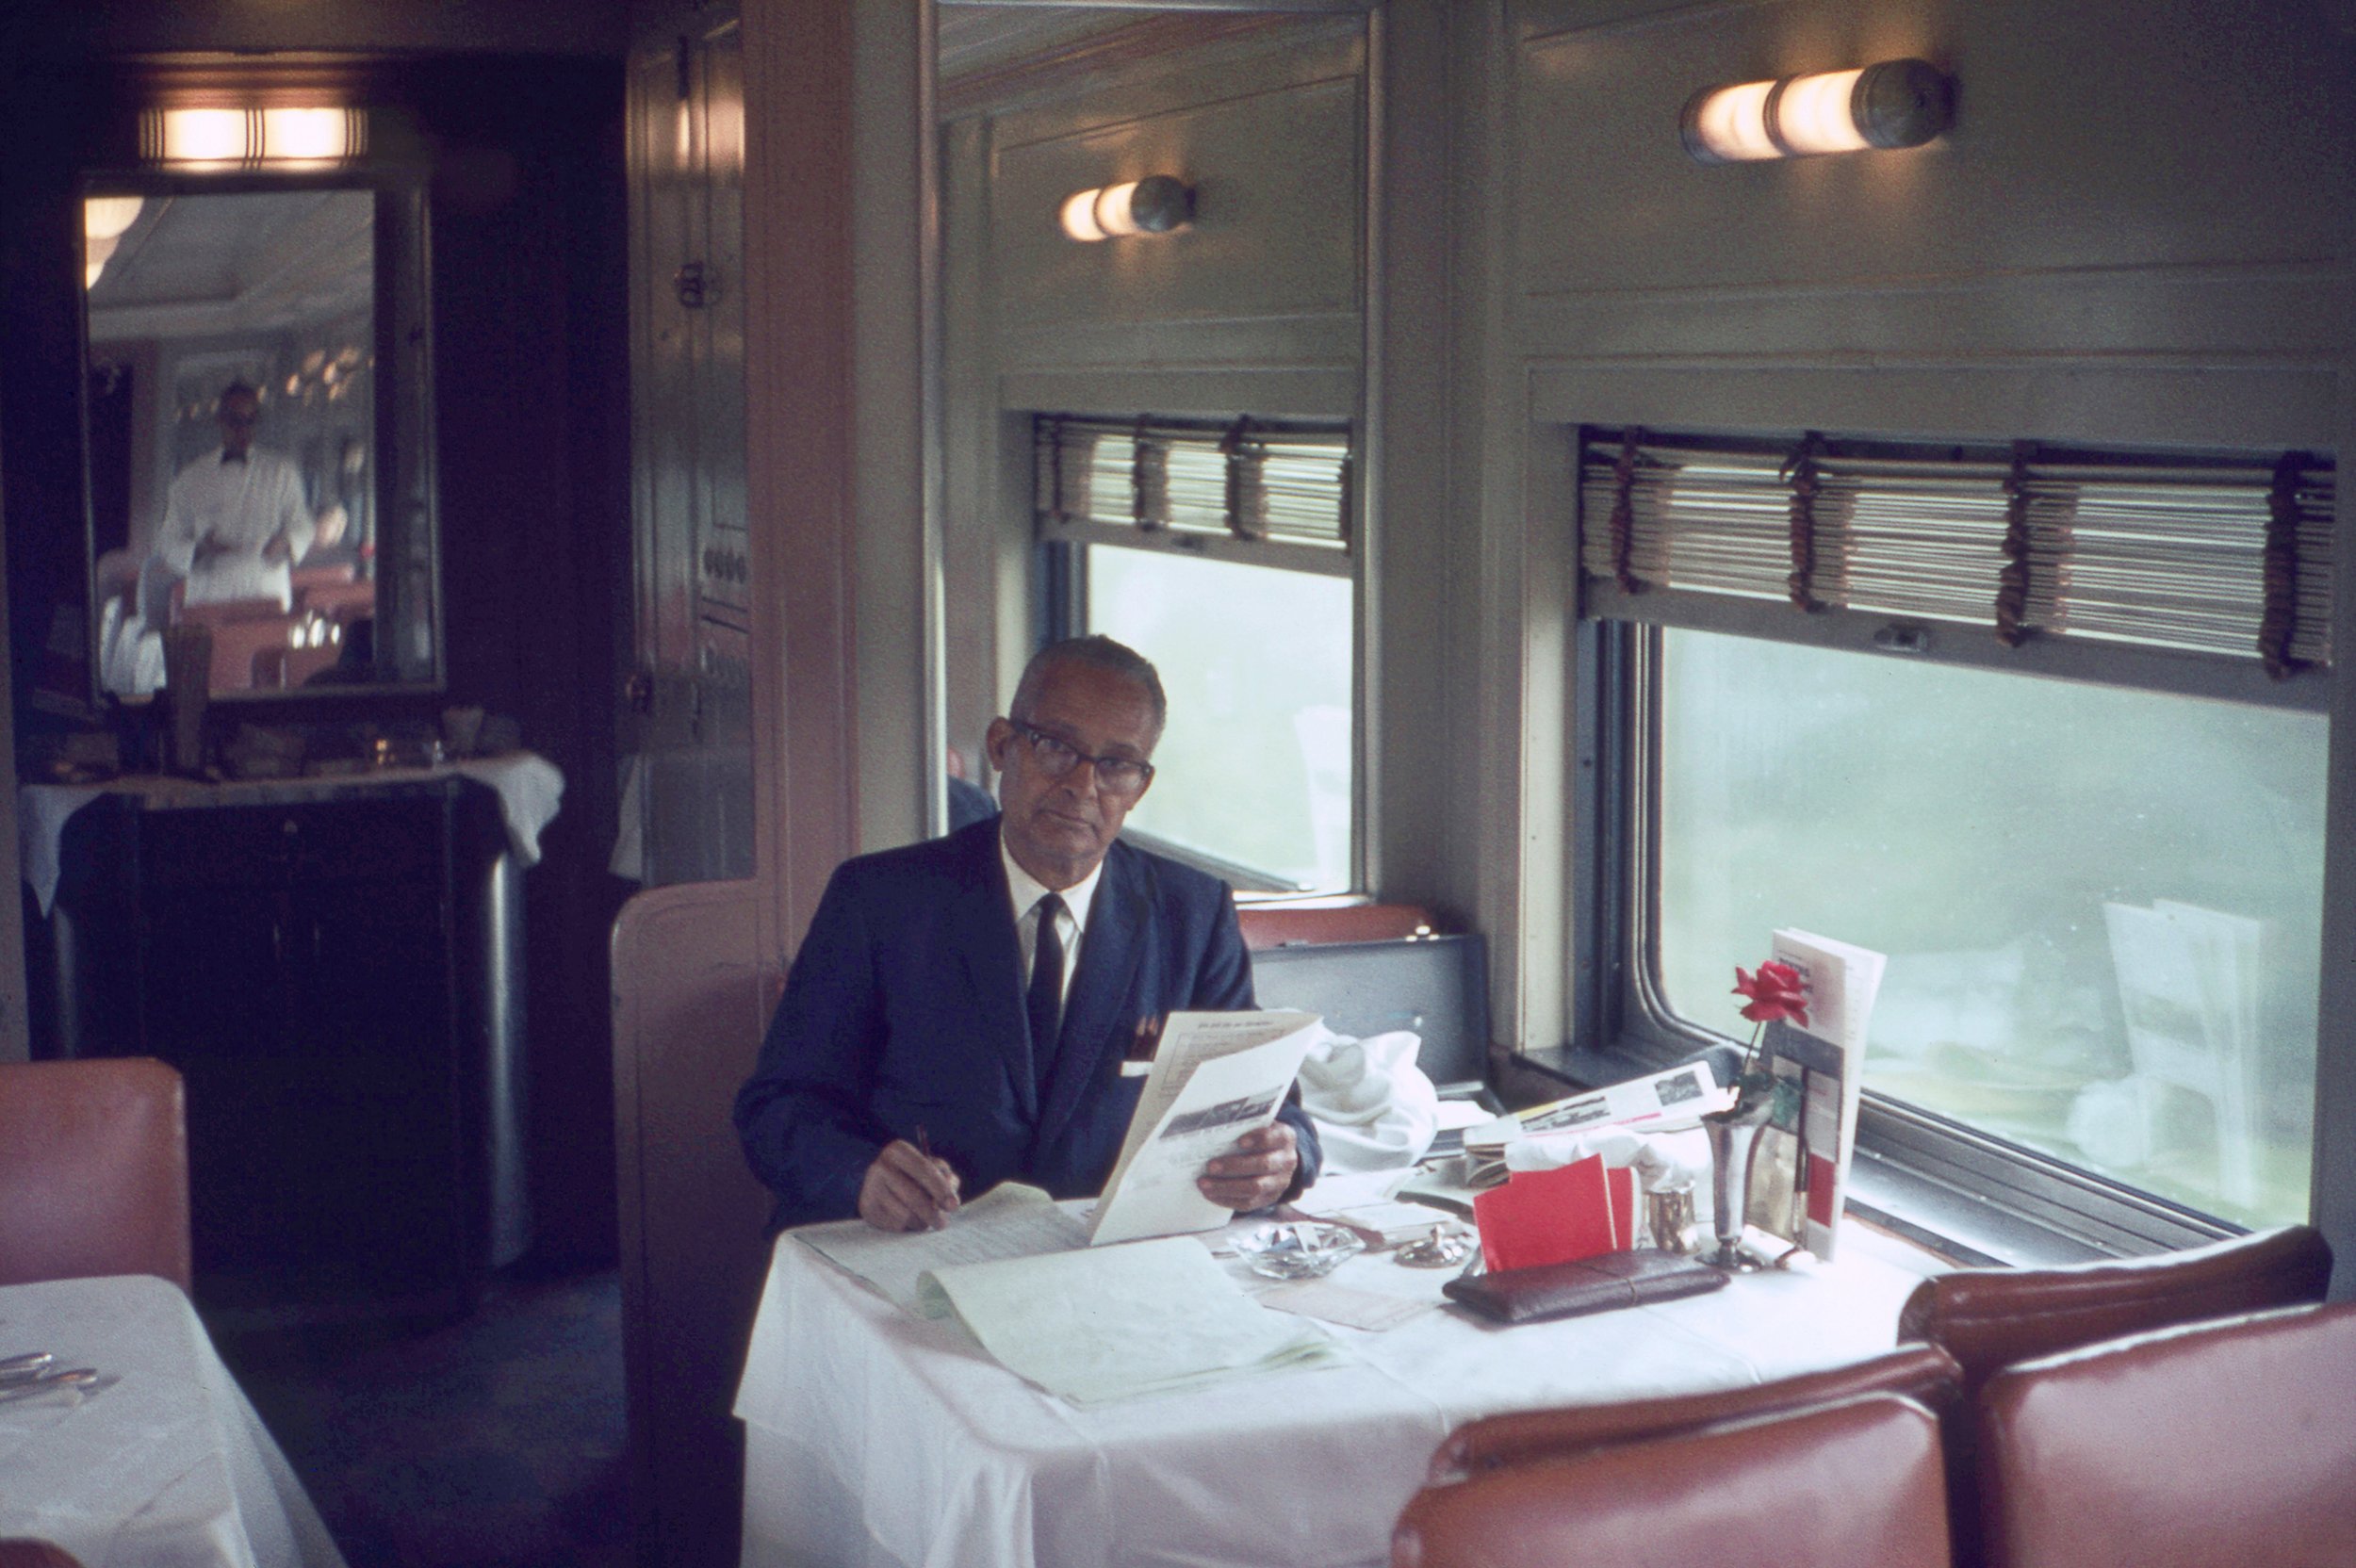   EL dining car director Arthur F . Elwyn, August 1966 at an unknown location - The Garbely Publishing Company collection  